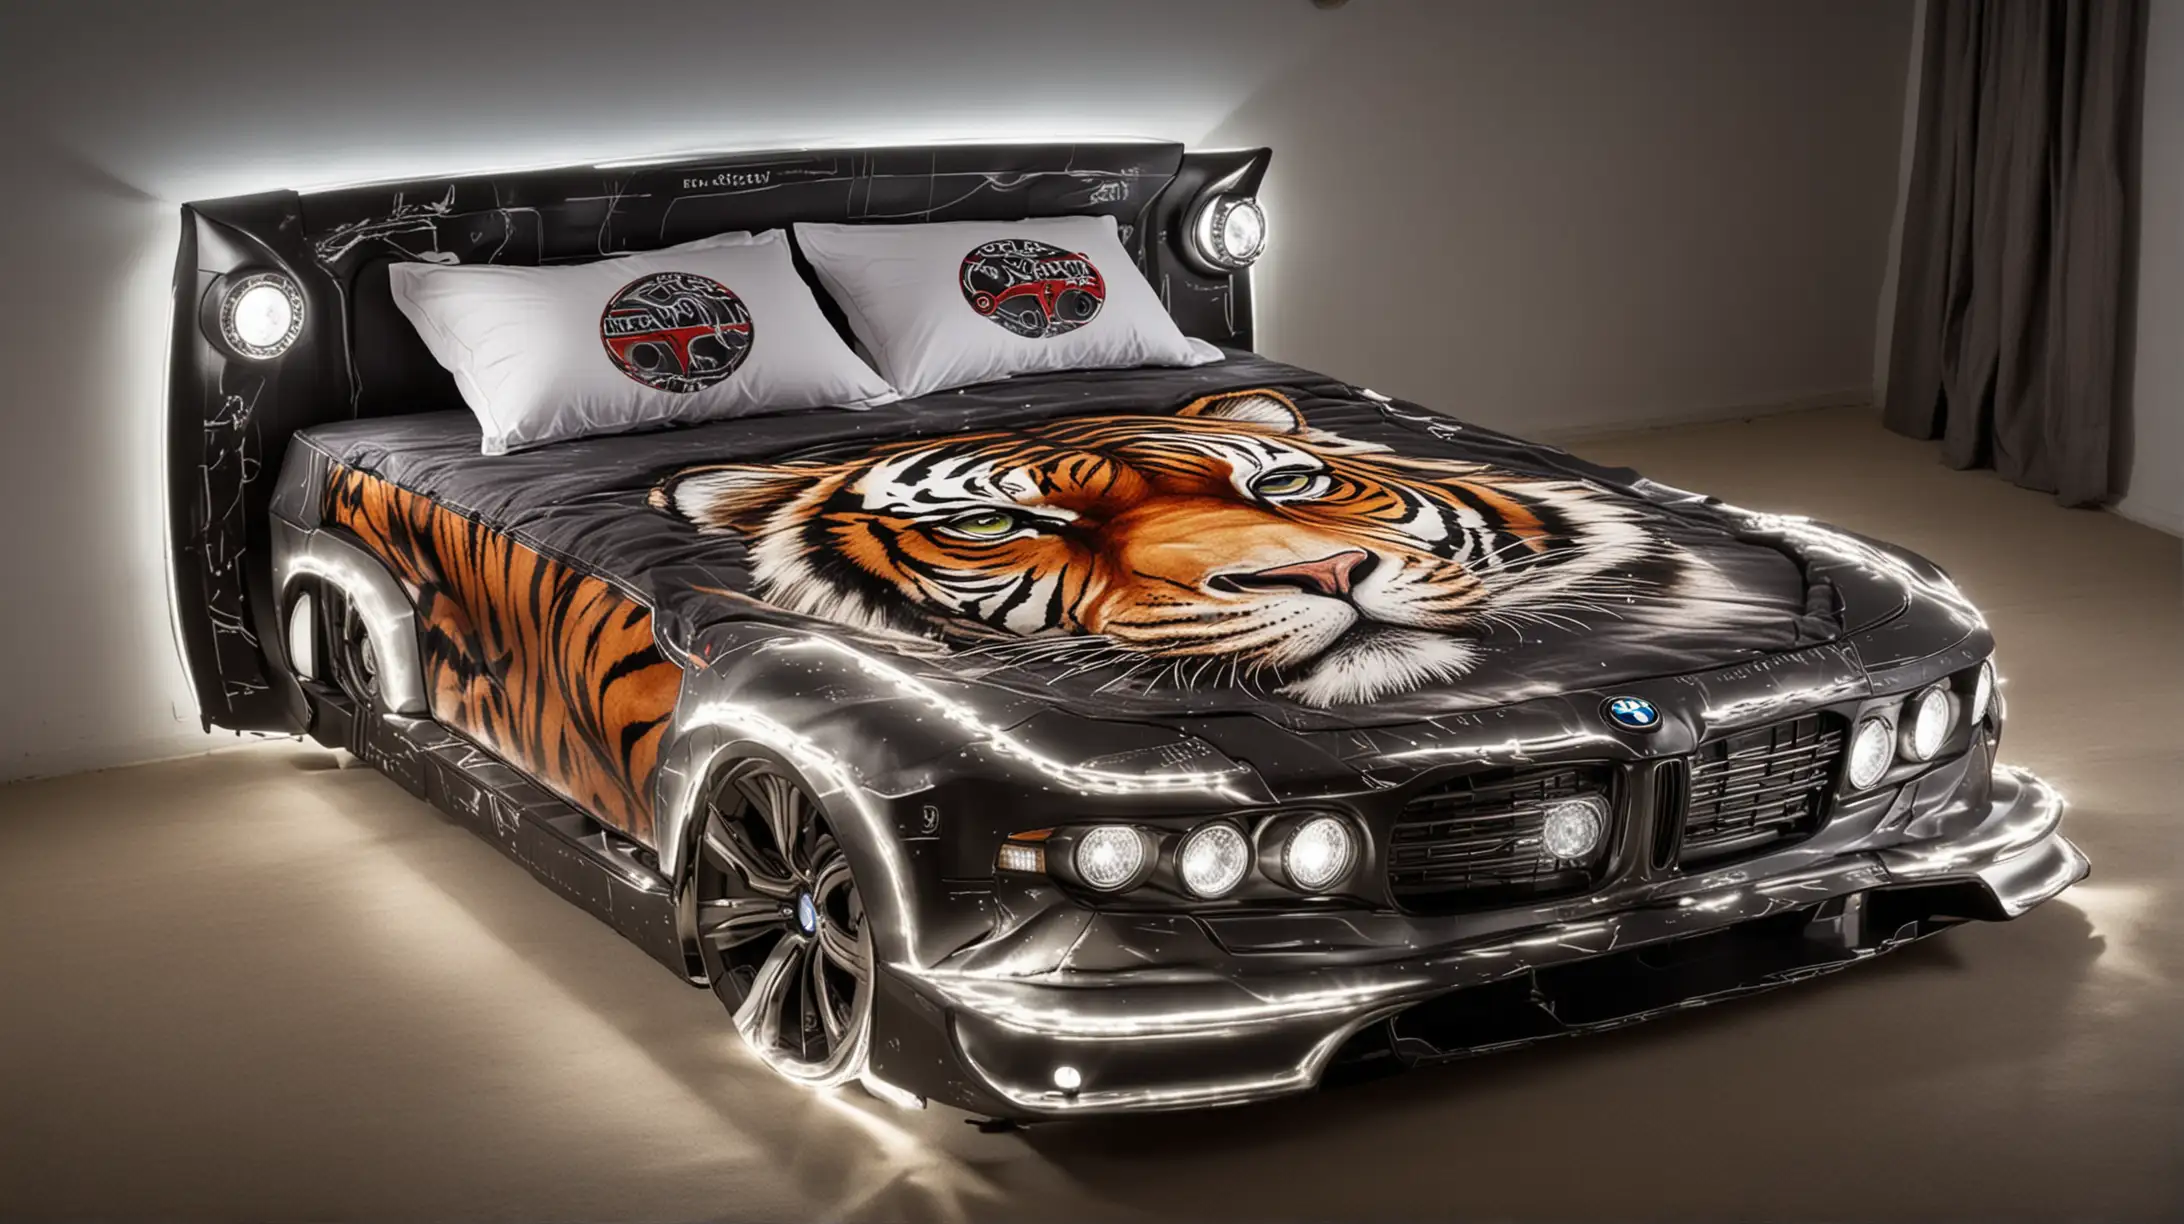 Double bed in the shape of a BMW car with headlights on and graphics of an evil and kind tiger